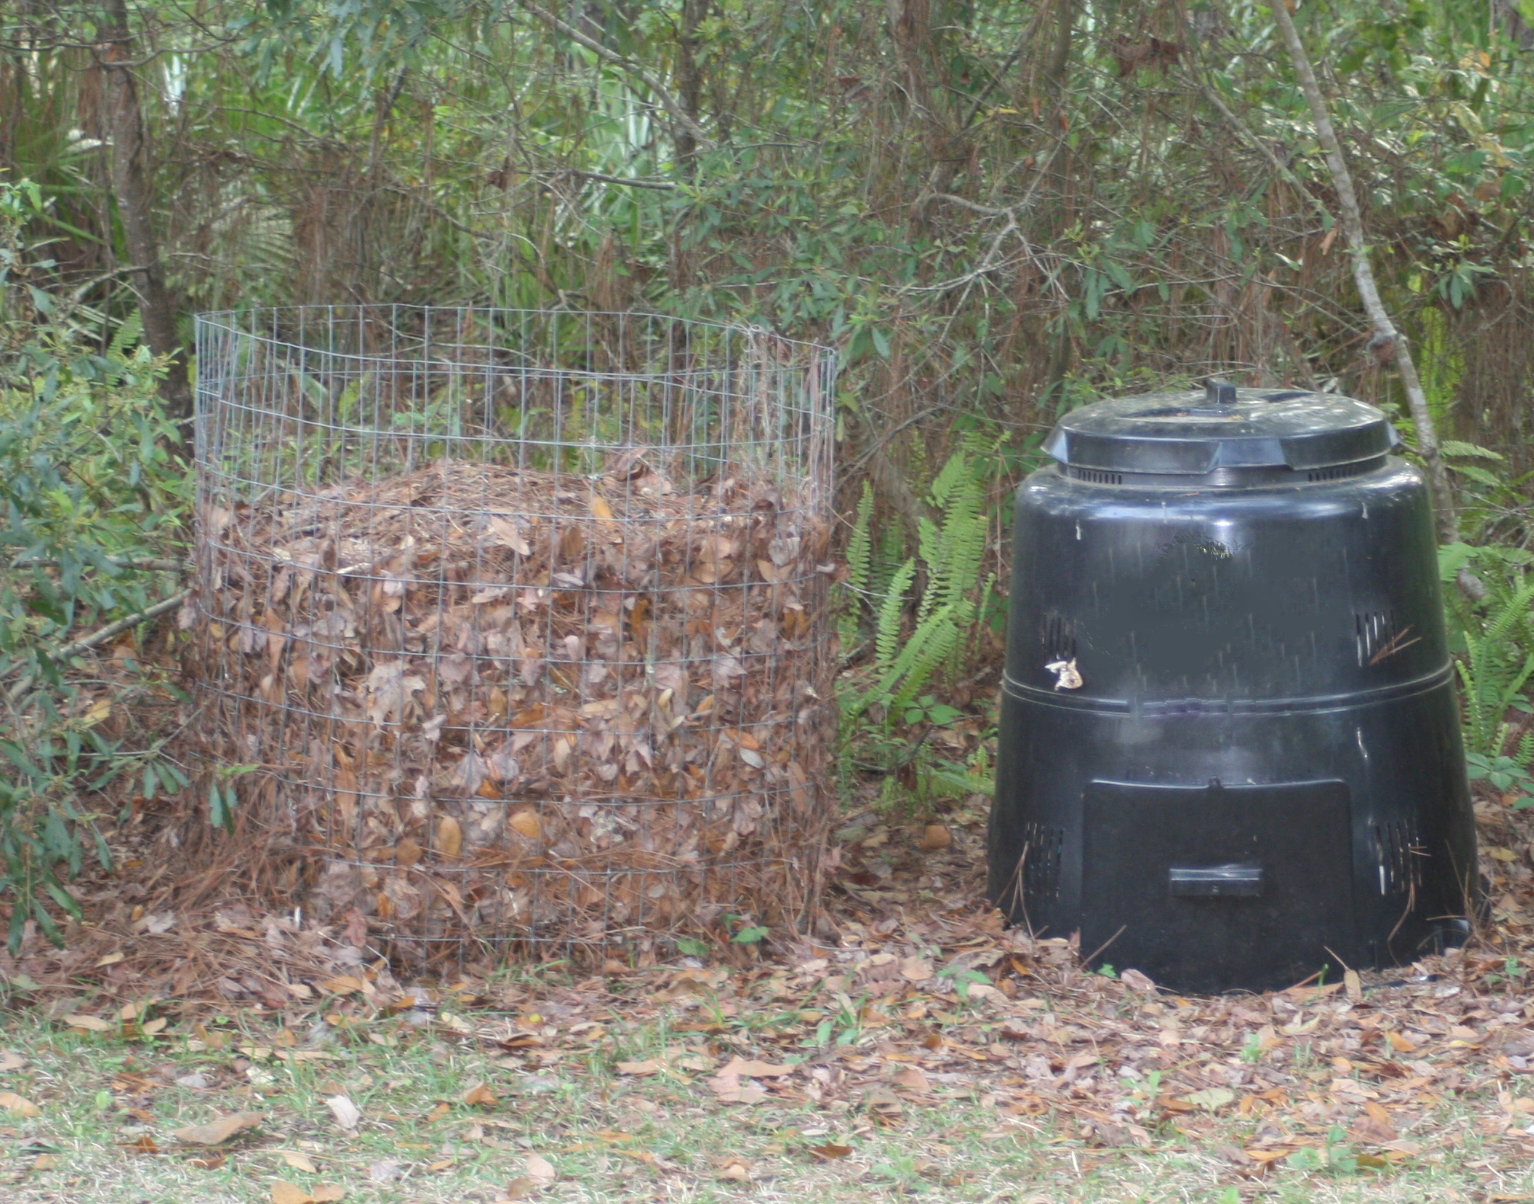 Two different types of backyard composters. One is a wire bin, the other is plastic.